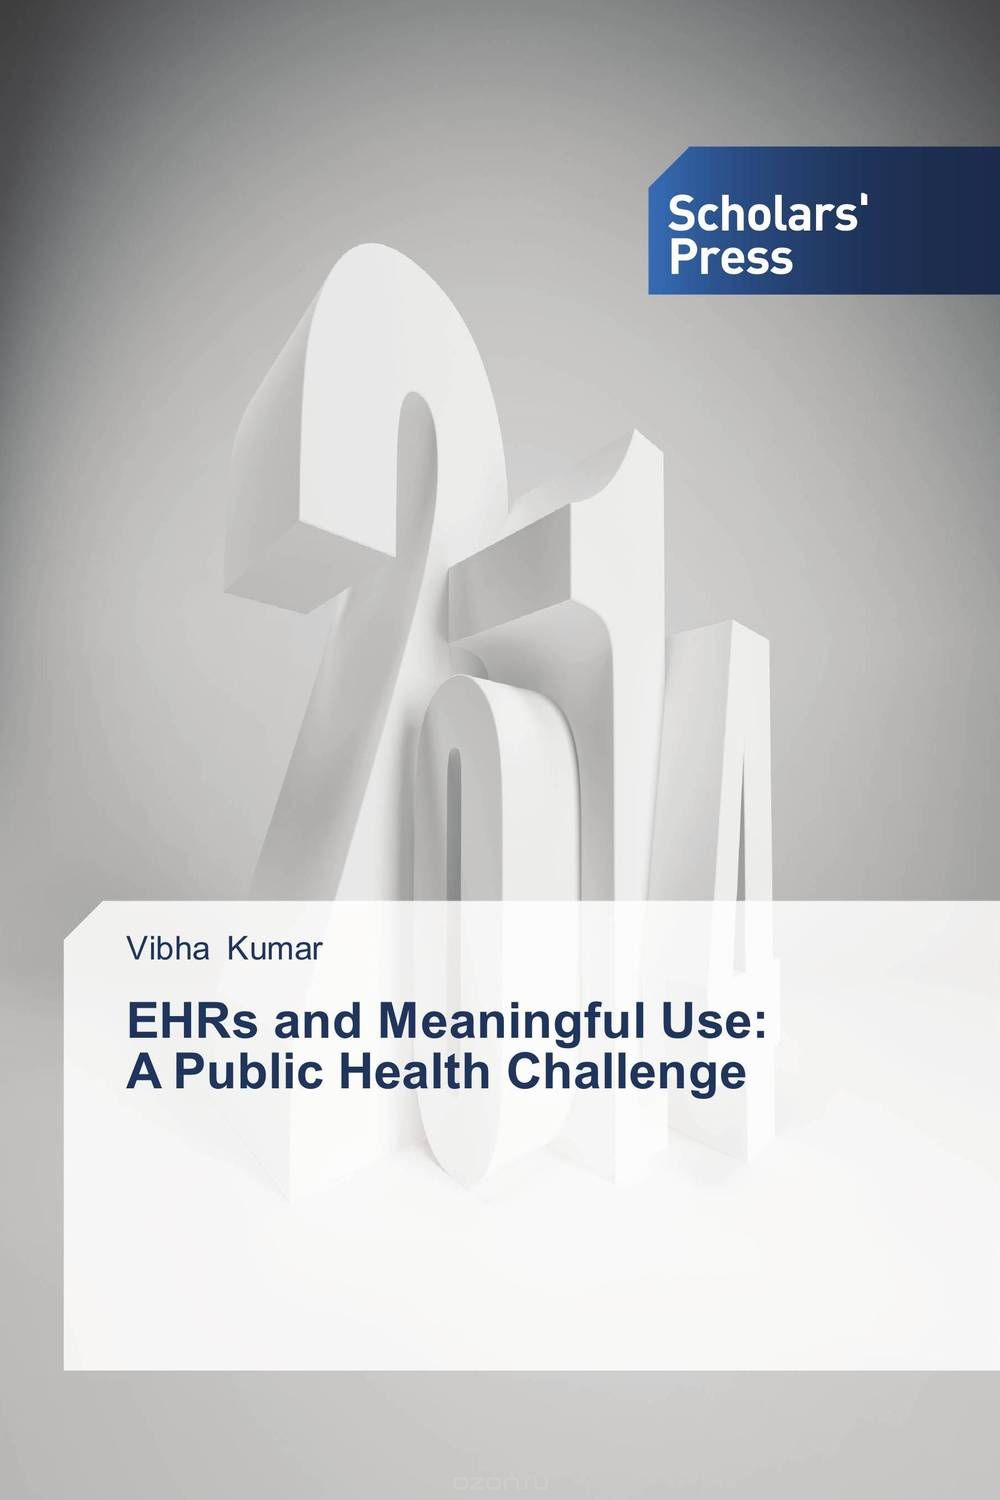 EHRs and Meaningful Use: A Public Health Challenge